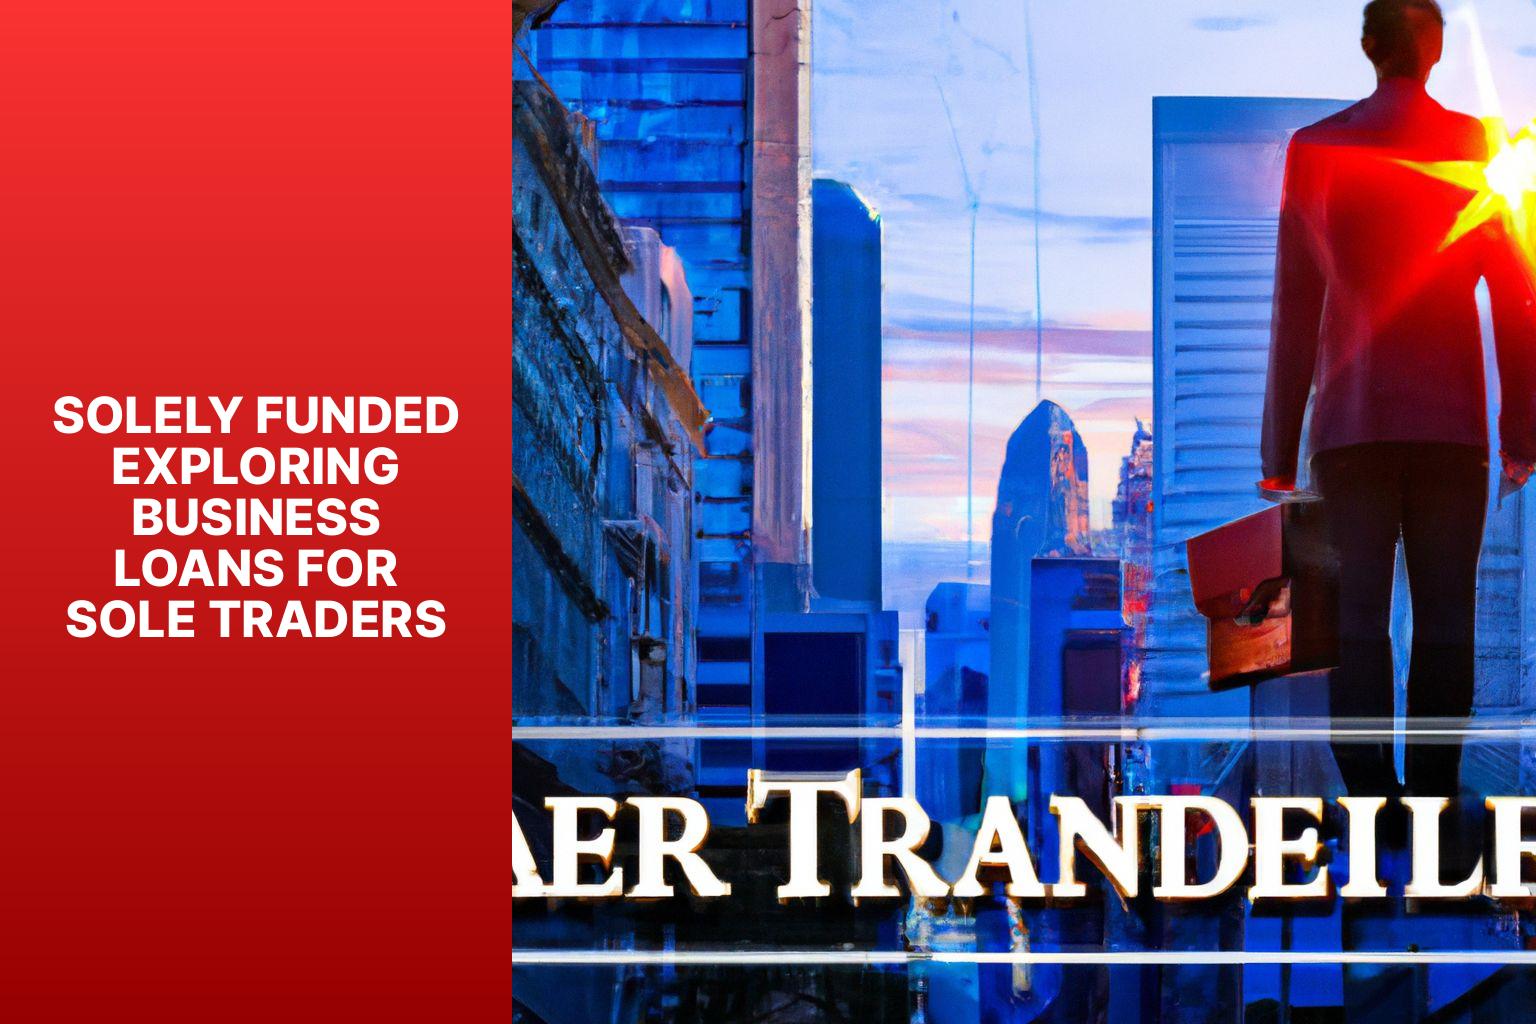 Solely Funded Exploring Business Loans for Sole Traders